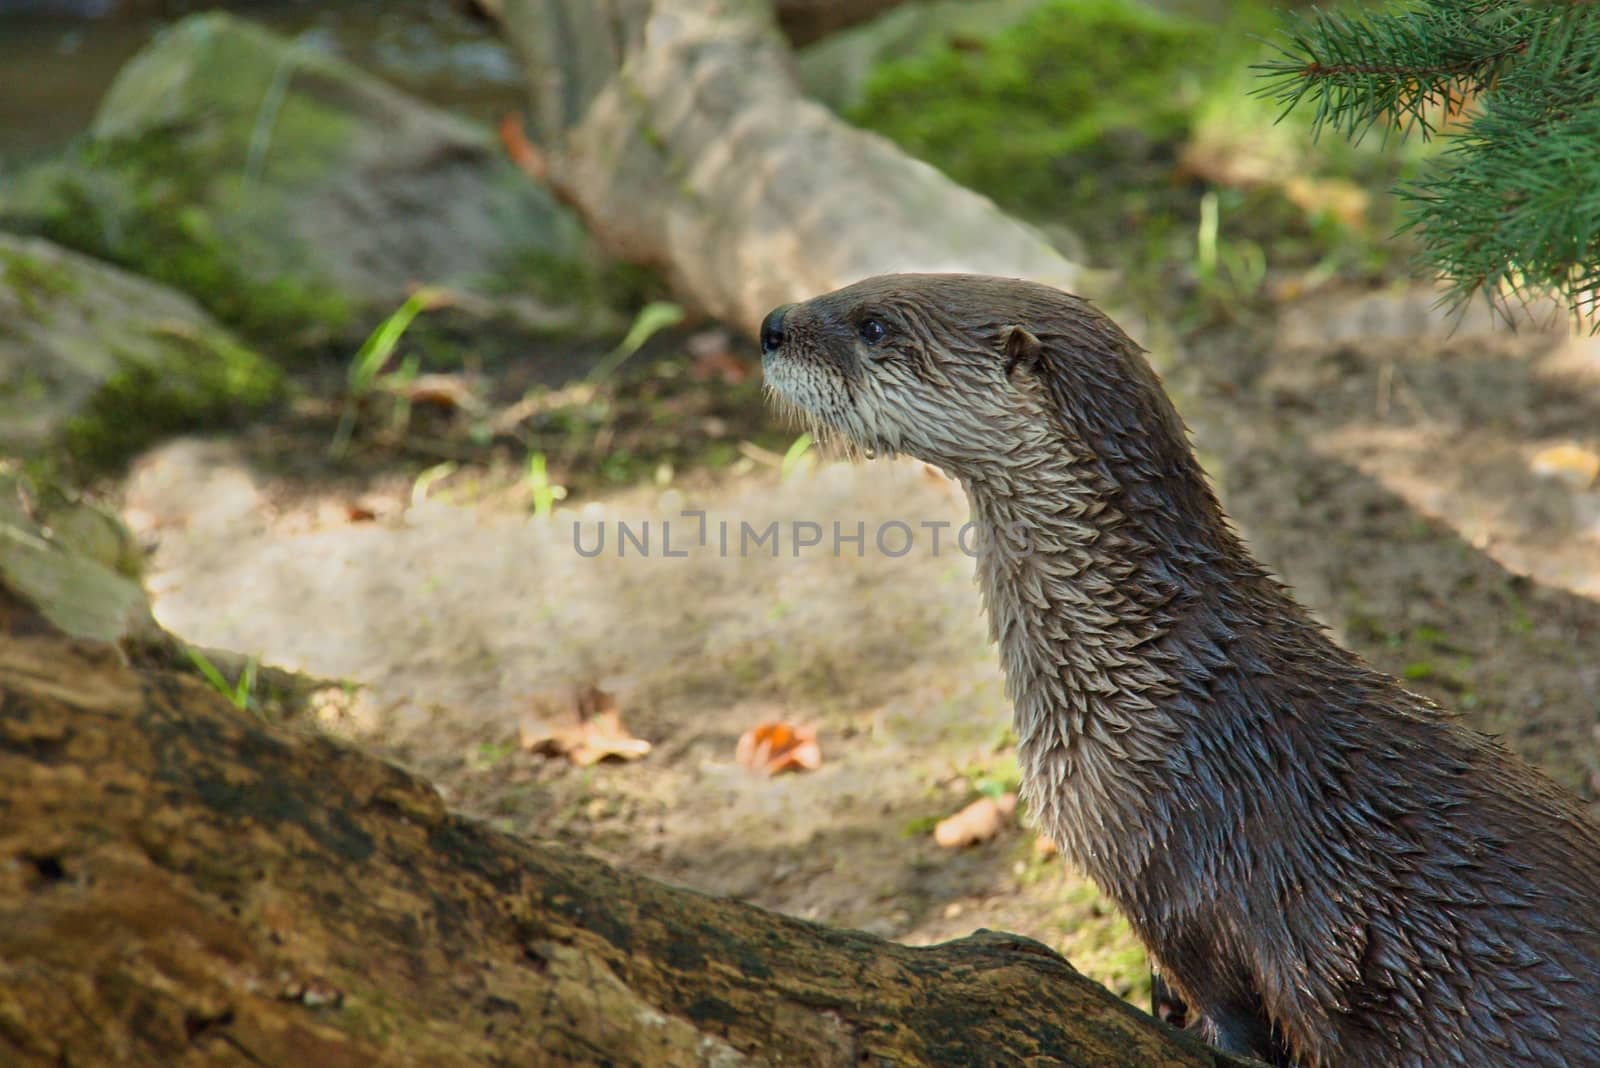 Photo shows a closeup of a wild water otter in the wood.